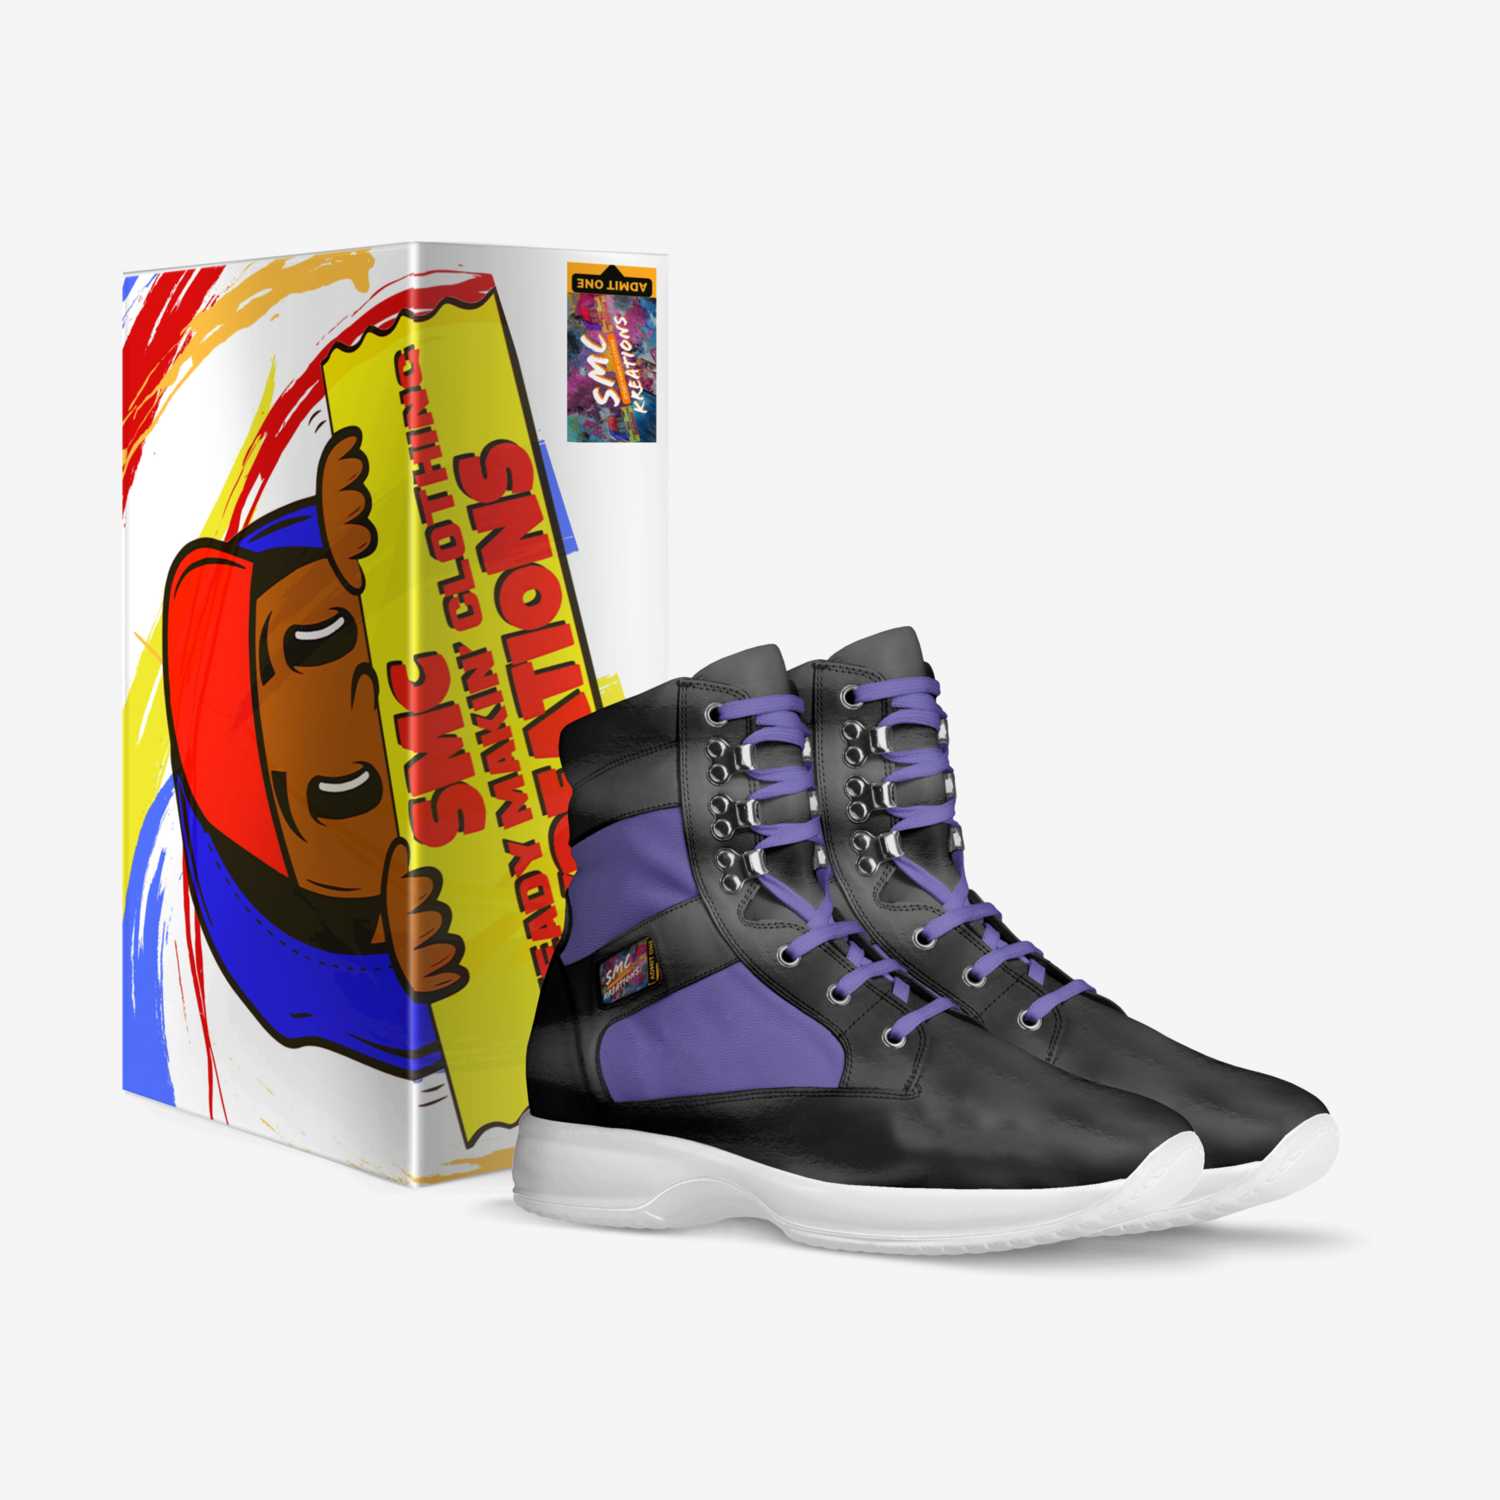 CMBT Black Panther custom made in Italy shoes by Shawn Mcnair | Box view